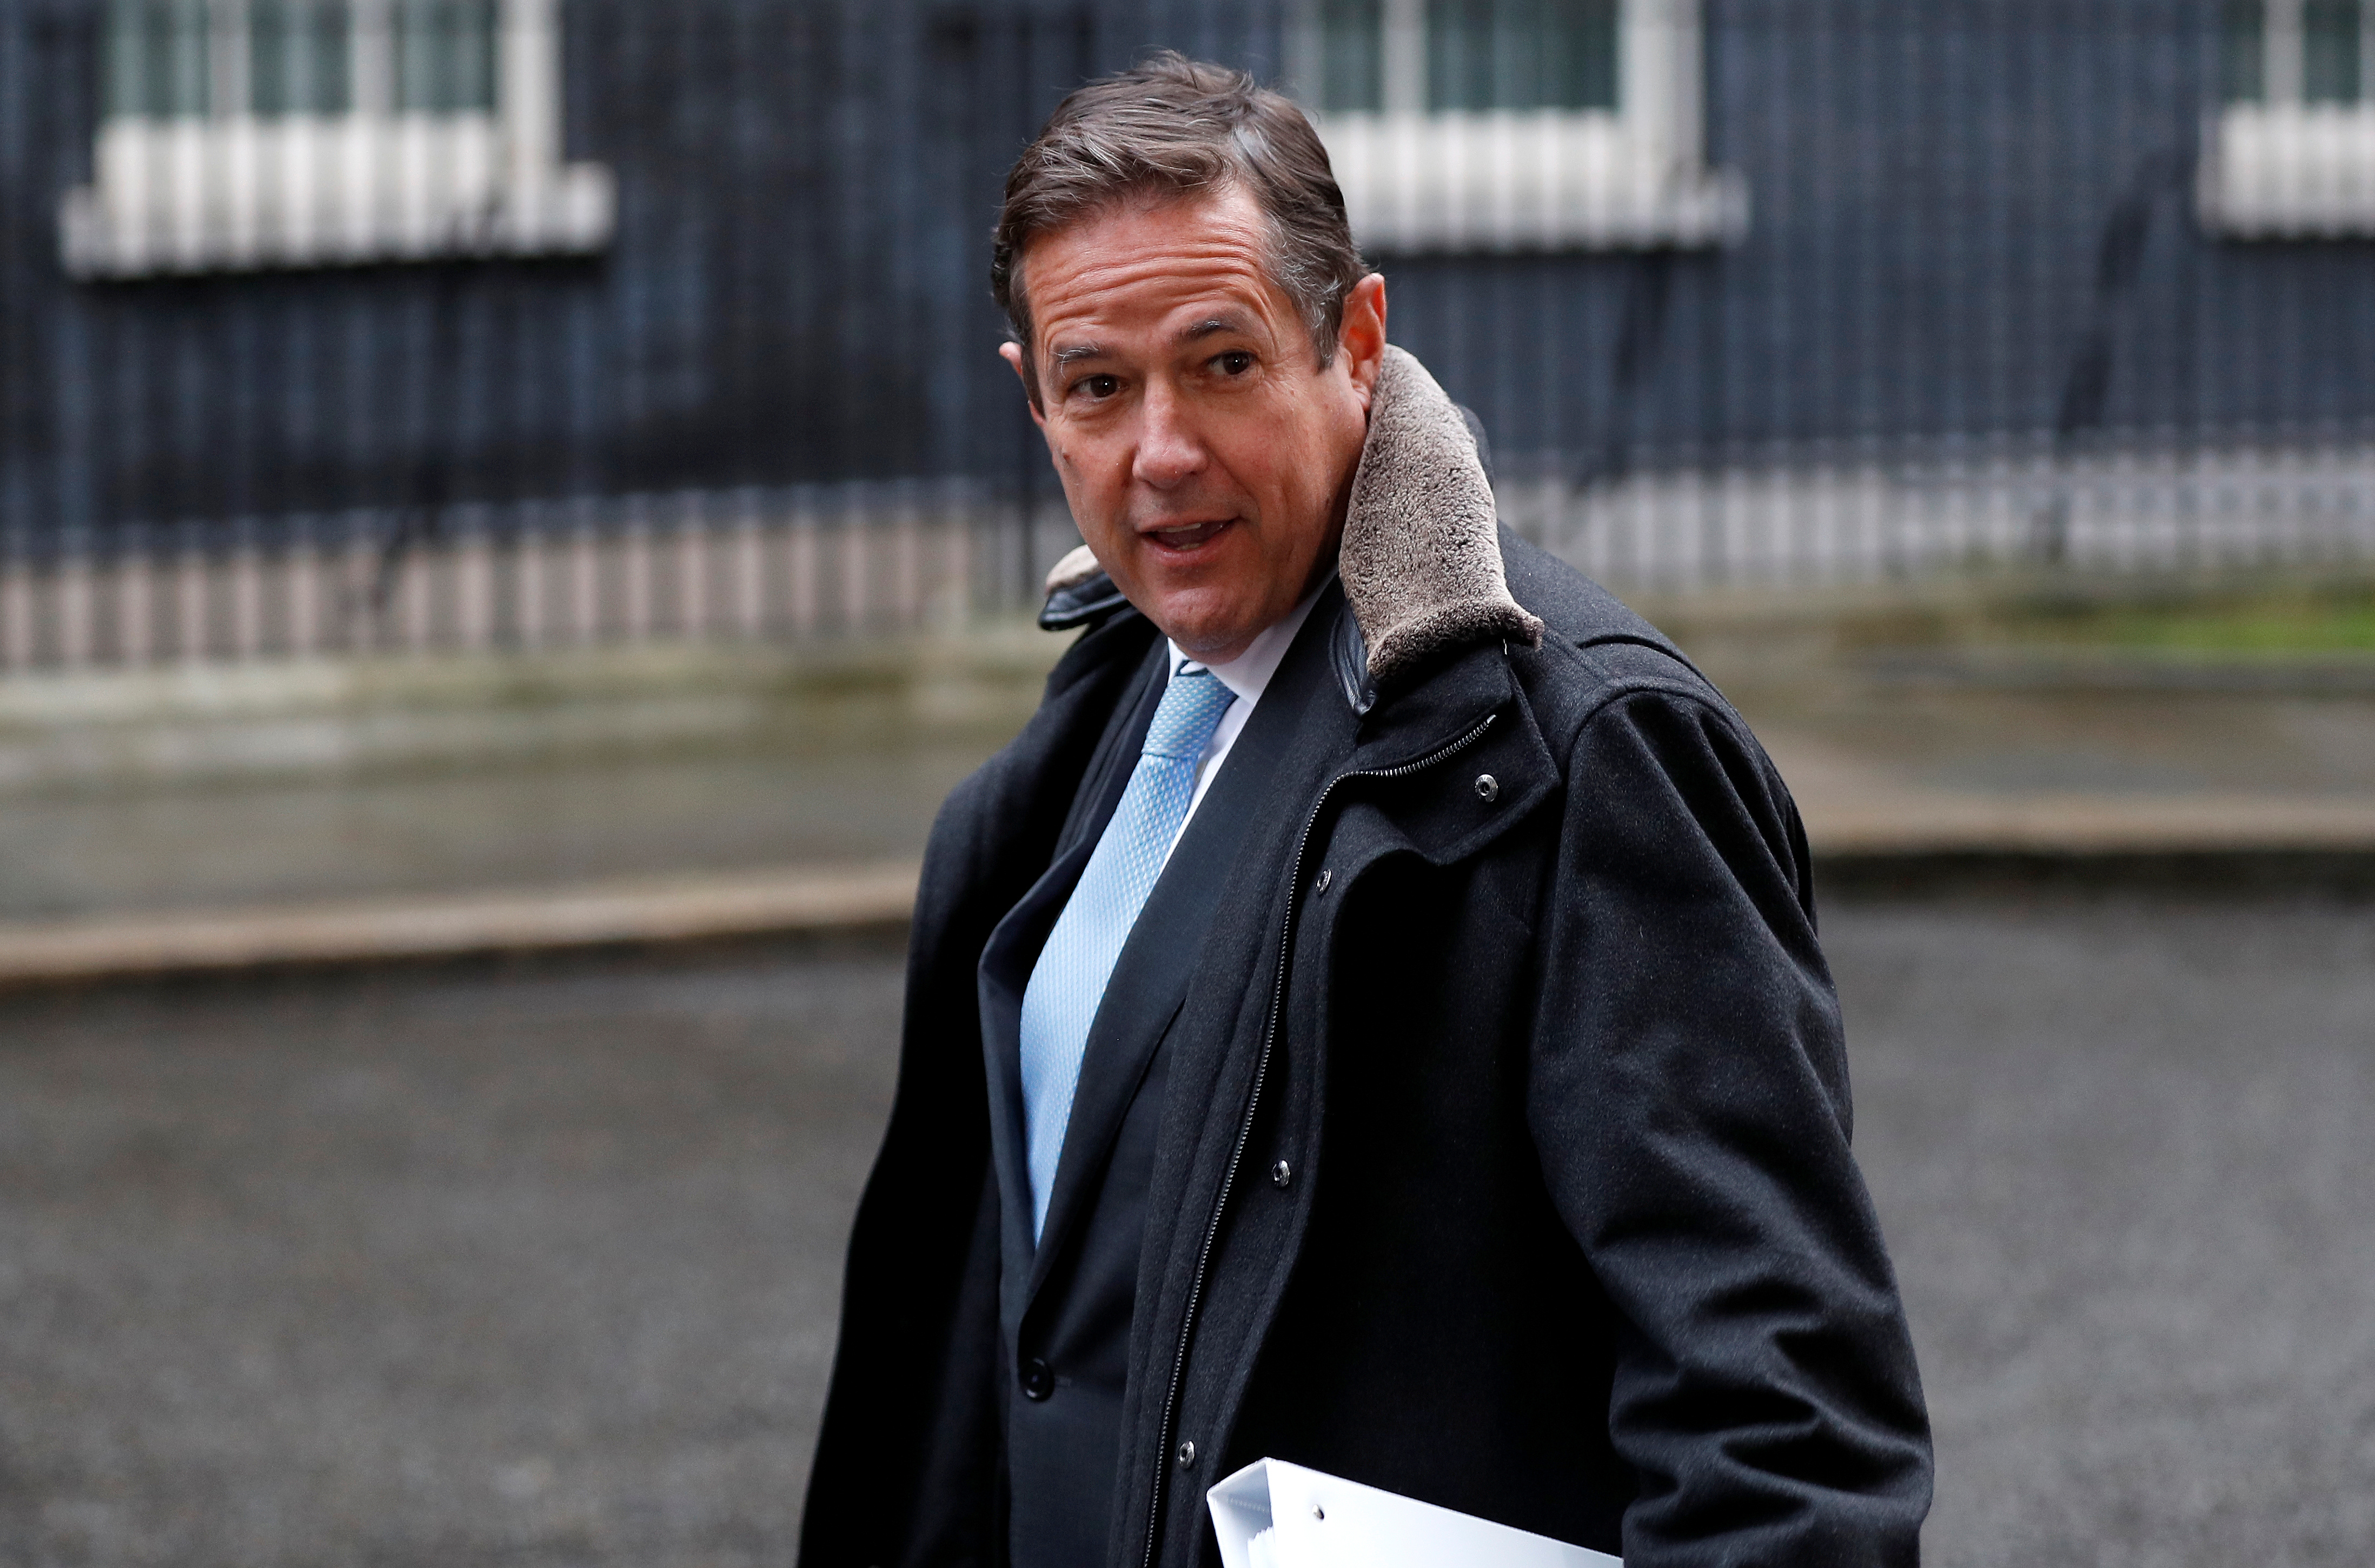 Barclays CEO Jes Staley arrives at 10 Downing Street in London, Britain, January 11, 2018. REUTERS/Peter Nicholls